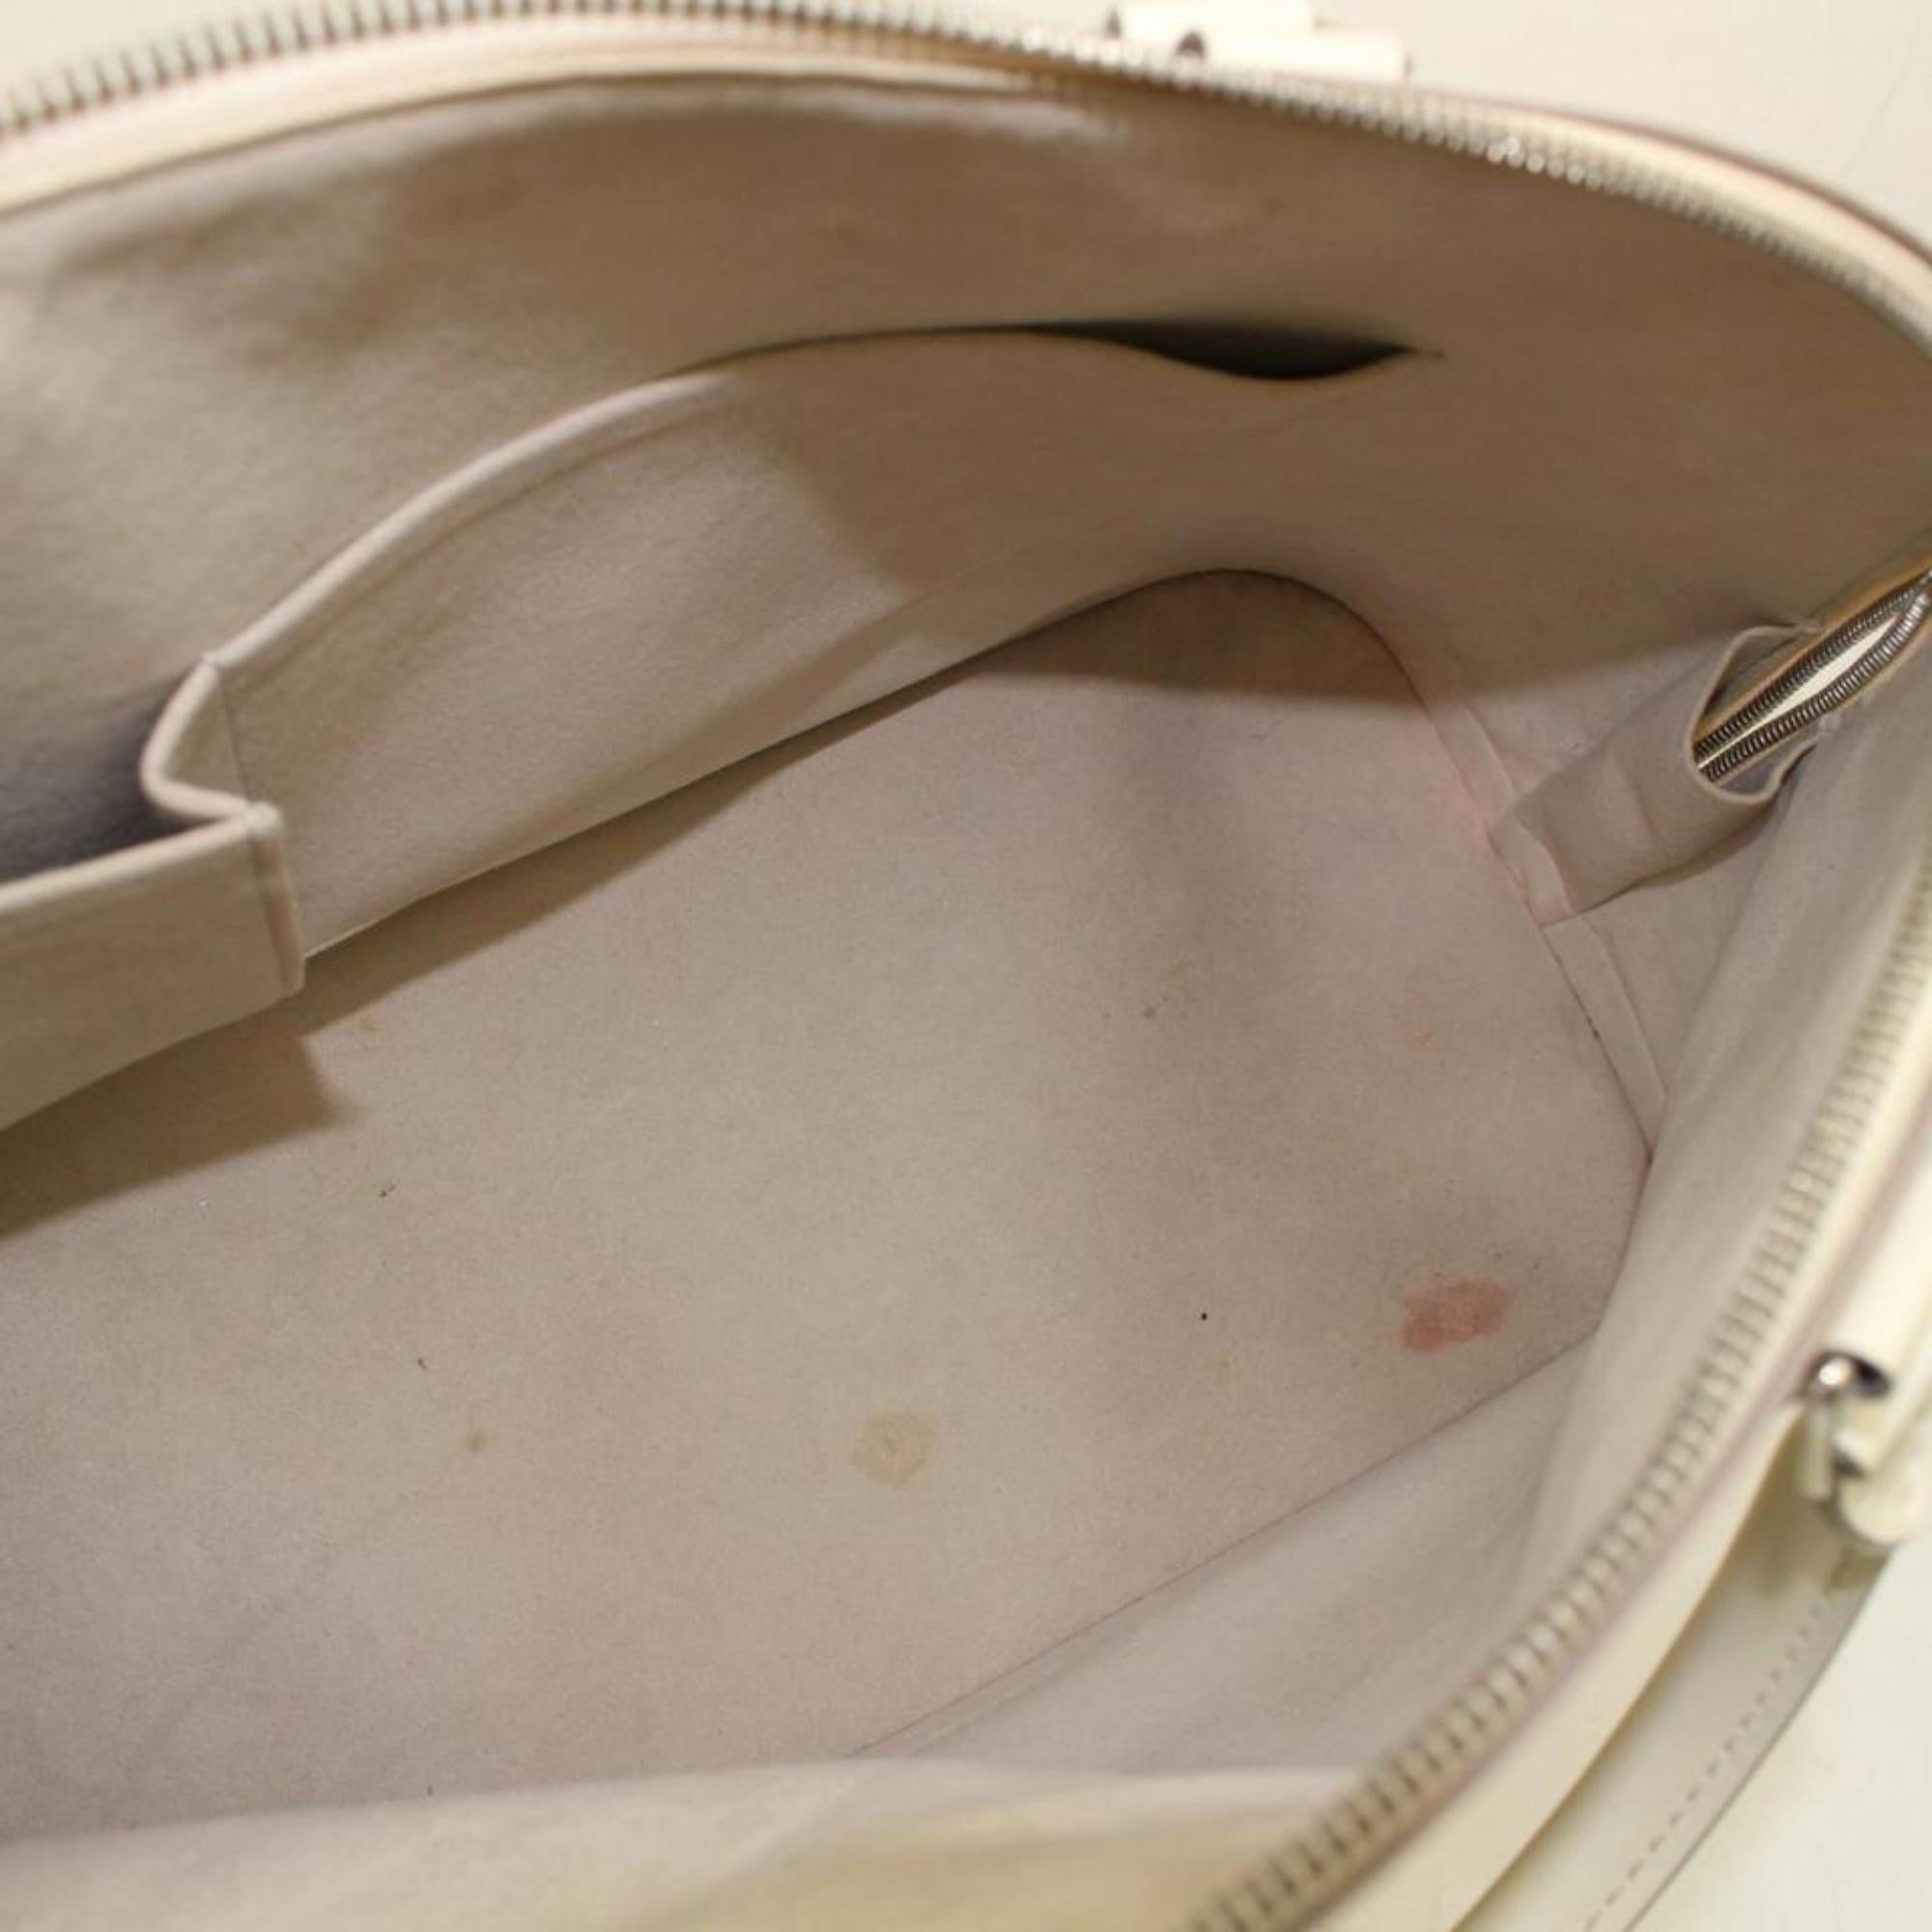 Louis Vuitton Alma Gm 866663 White Leather Satchel In Good Condition For Sale In Forest Hills, NY